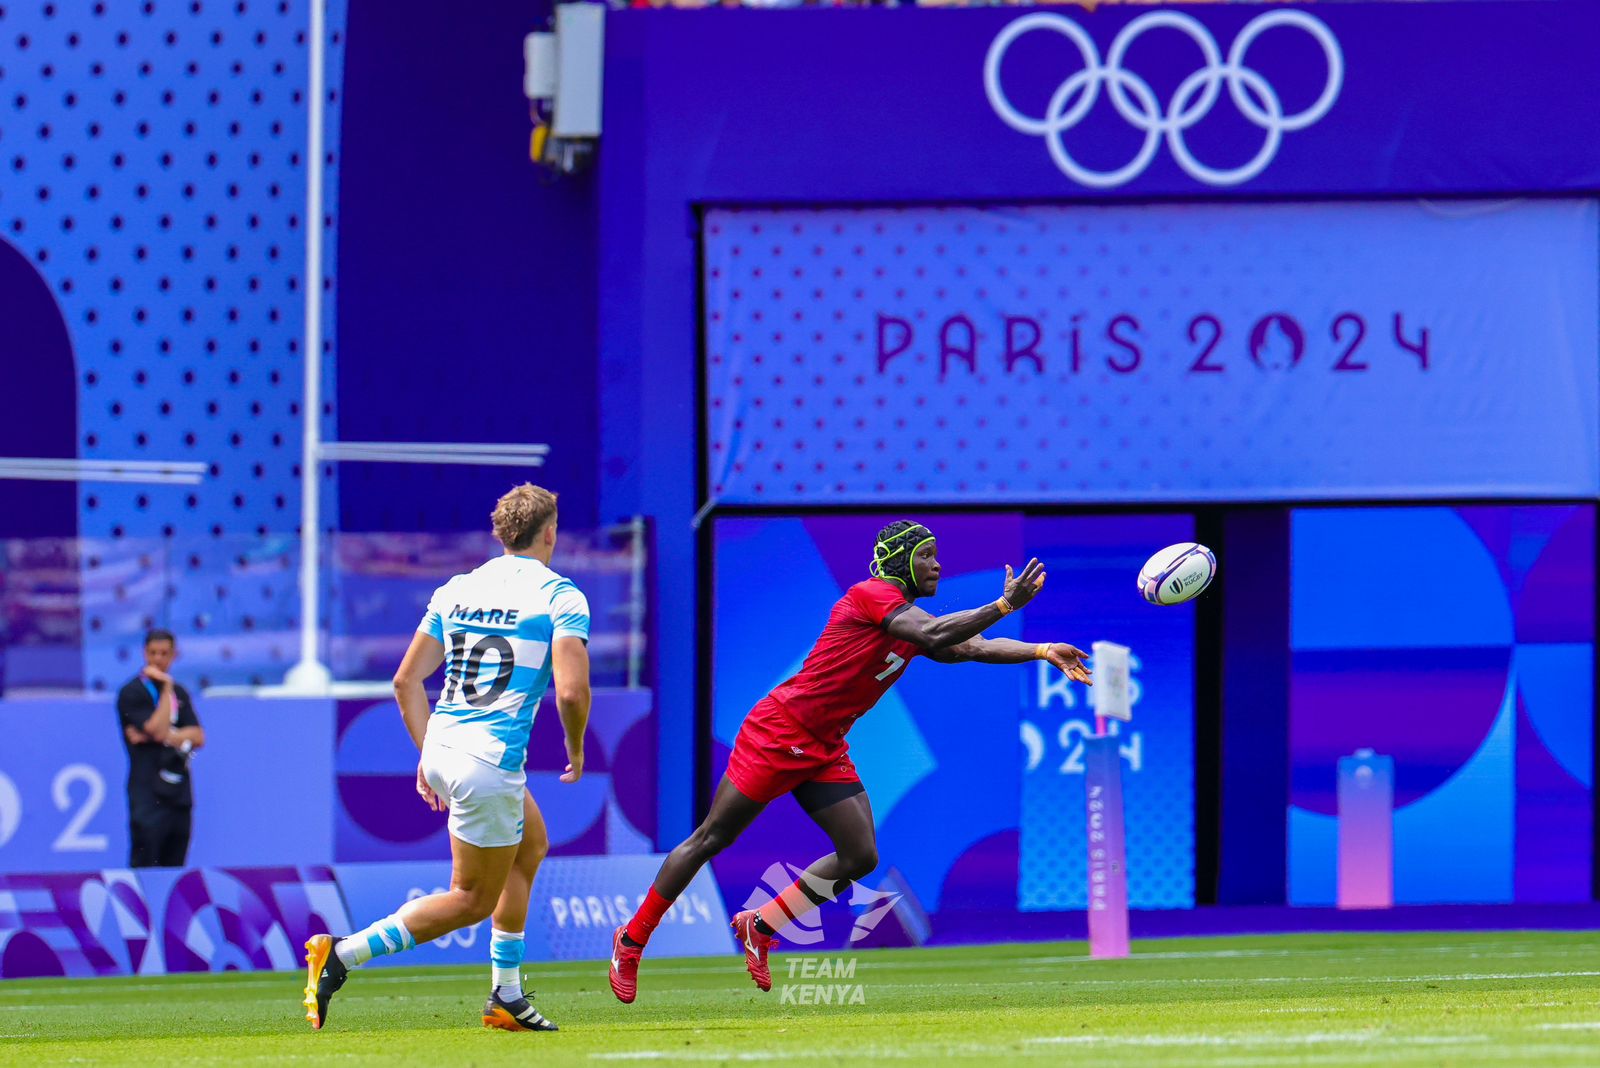 PARIS 2024: Young Shujaa falls short against Argentina in Olympic opener